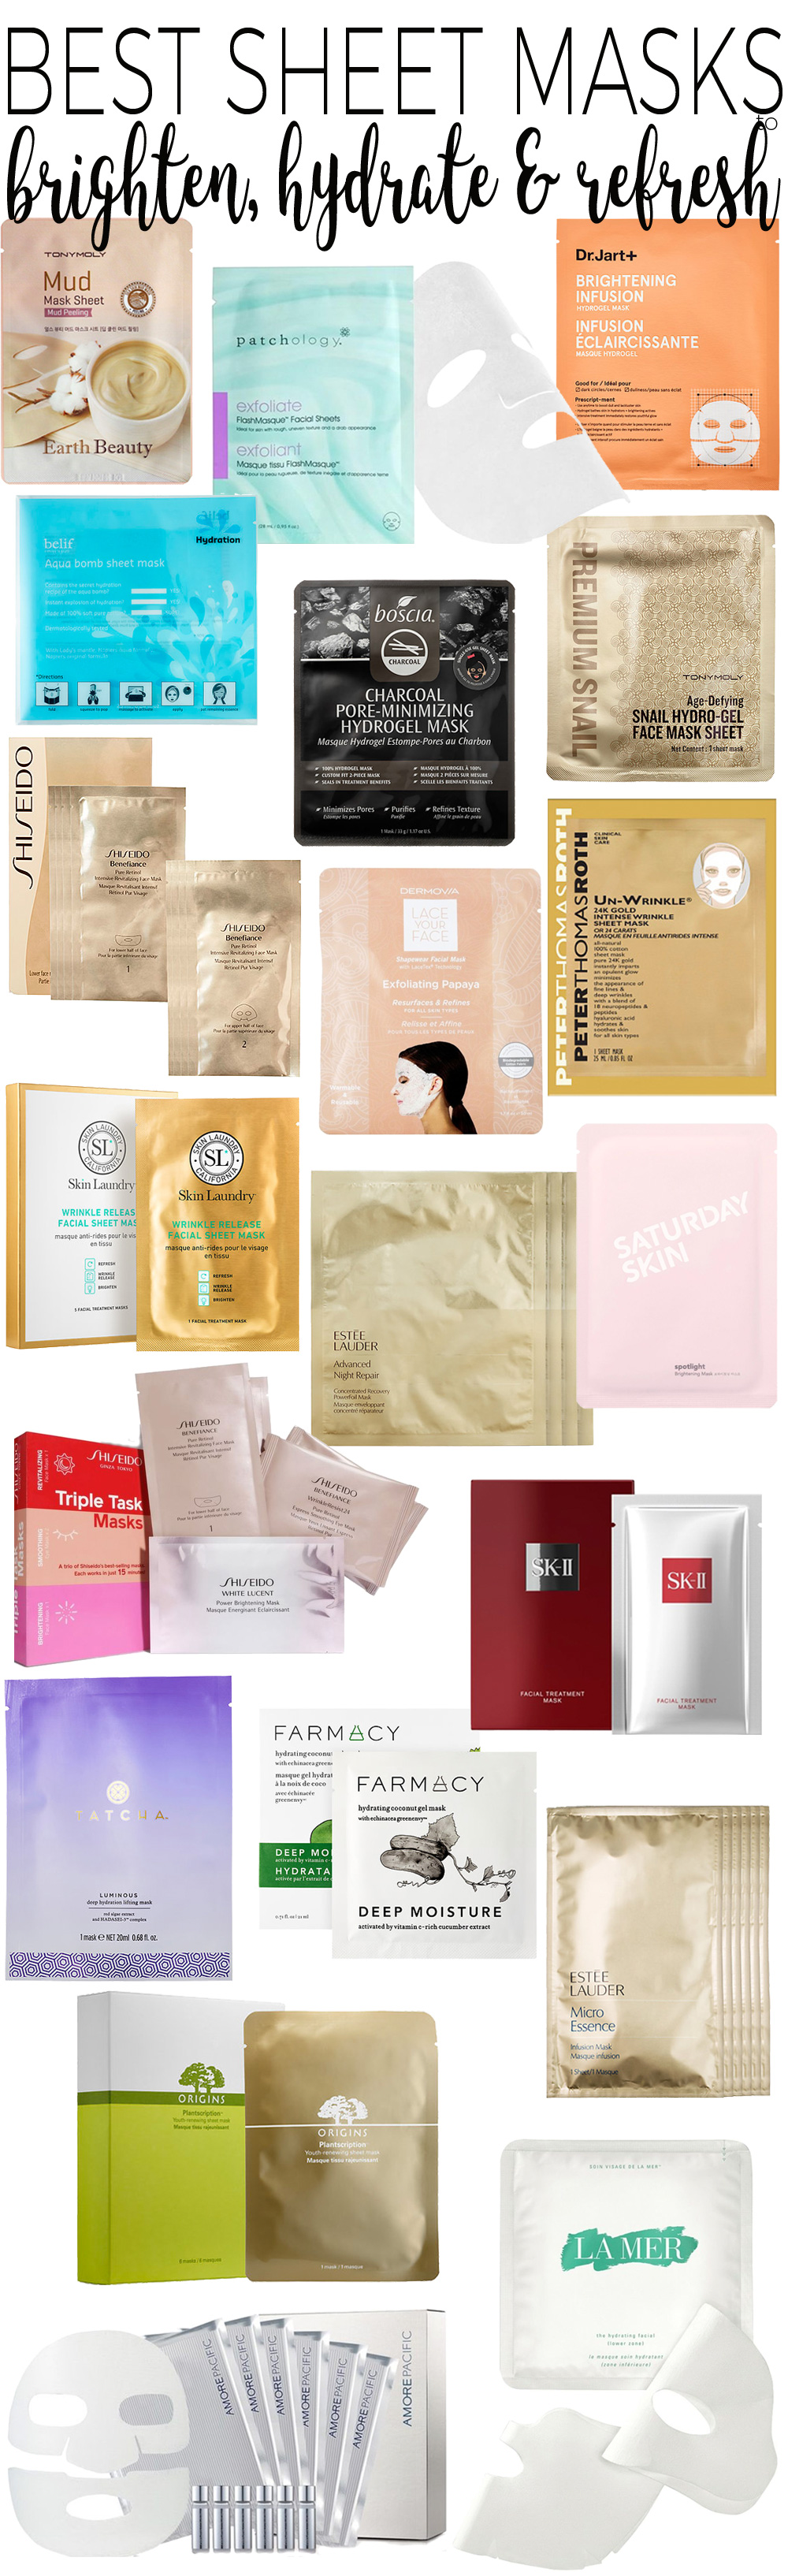 Top 20 Sheet Masks to Brighten, Hydrate and Refresh Skin